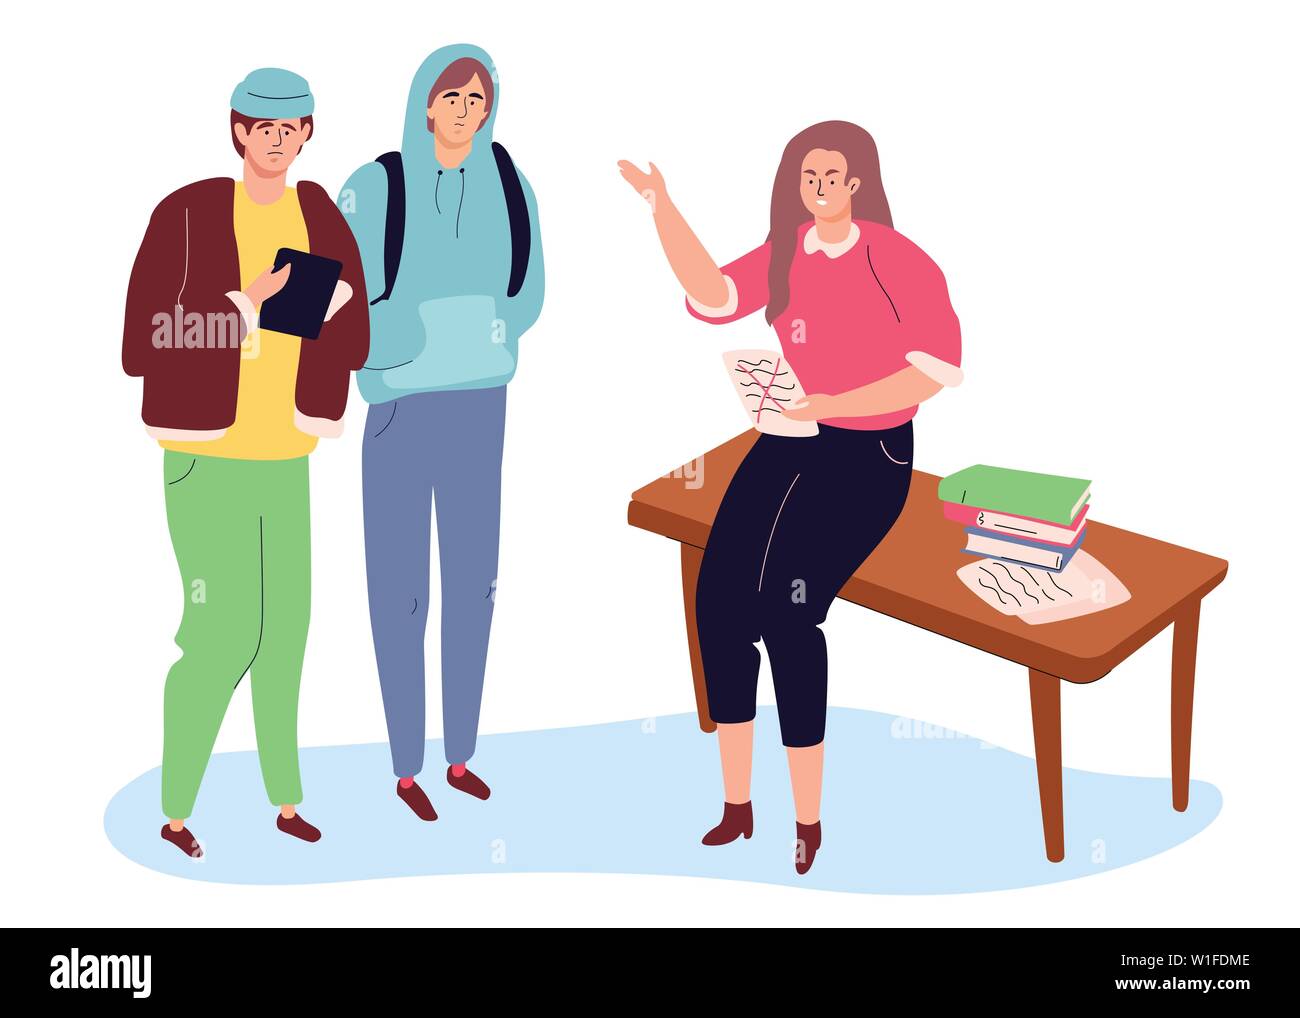 Students on a lesson - colorful flat design style illustration Stock Vector